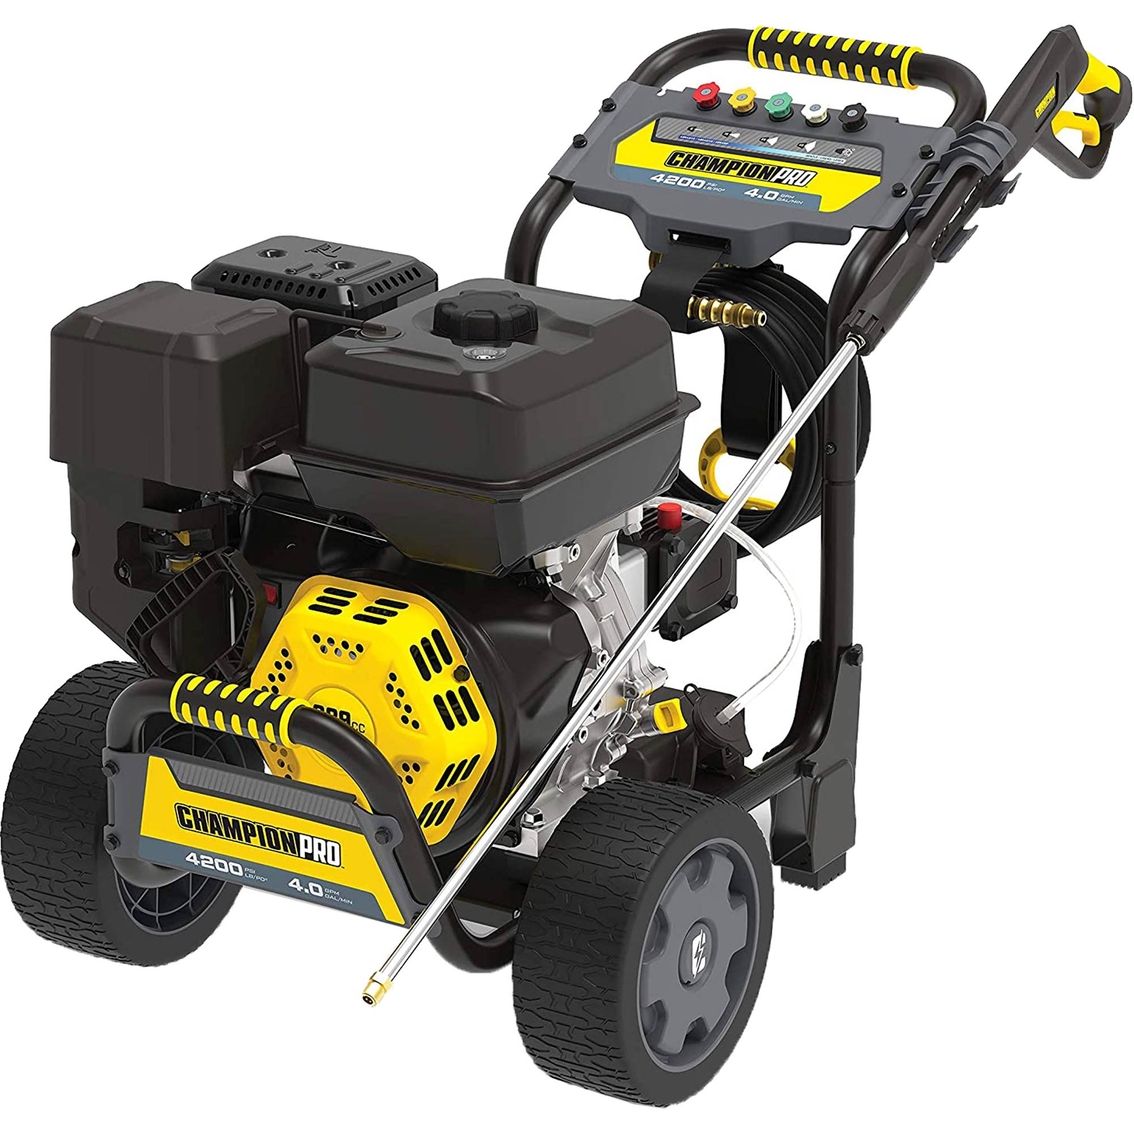 Champion 4200 PSI Commercial Duty Gas Pressure Washer 100790 - Image 1 of 5